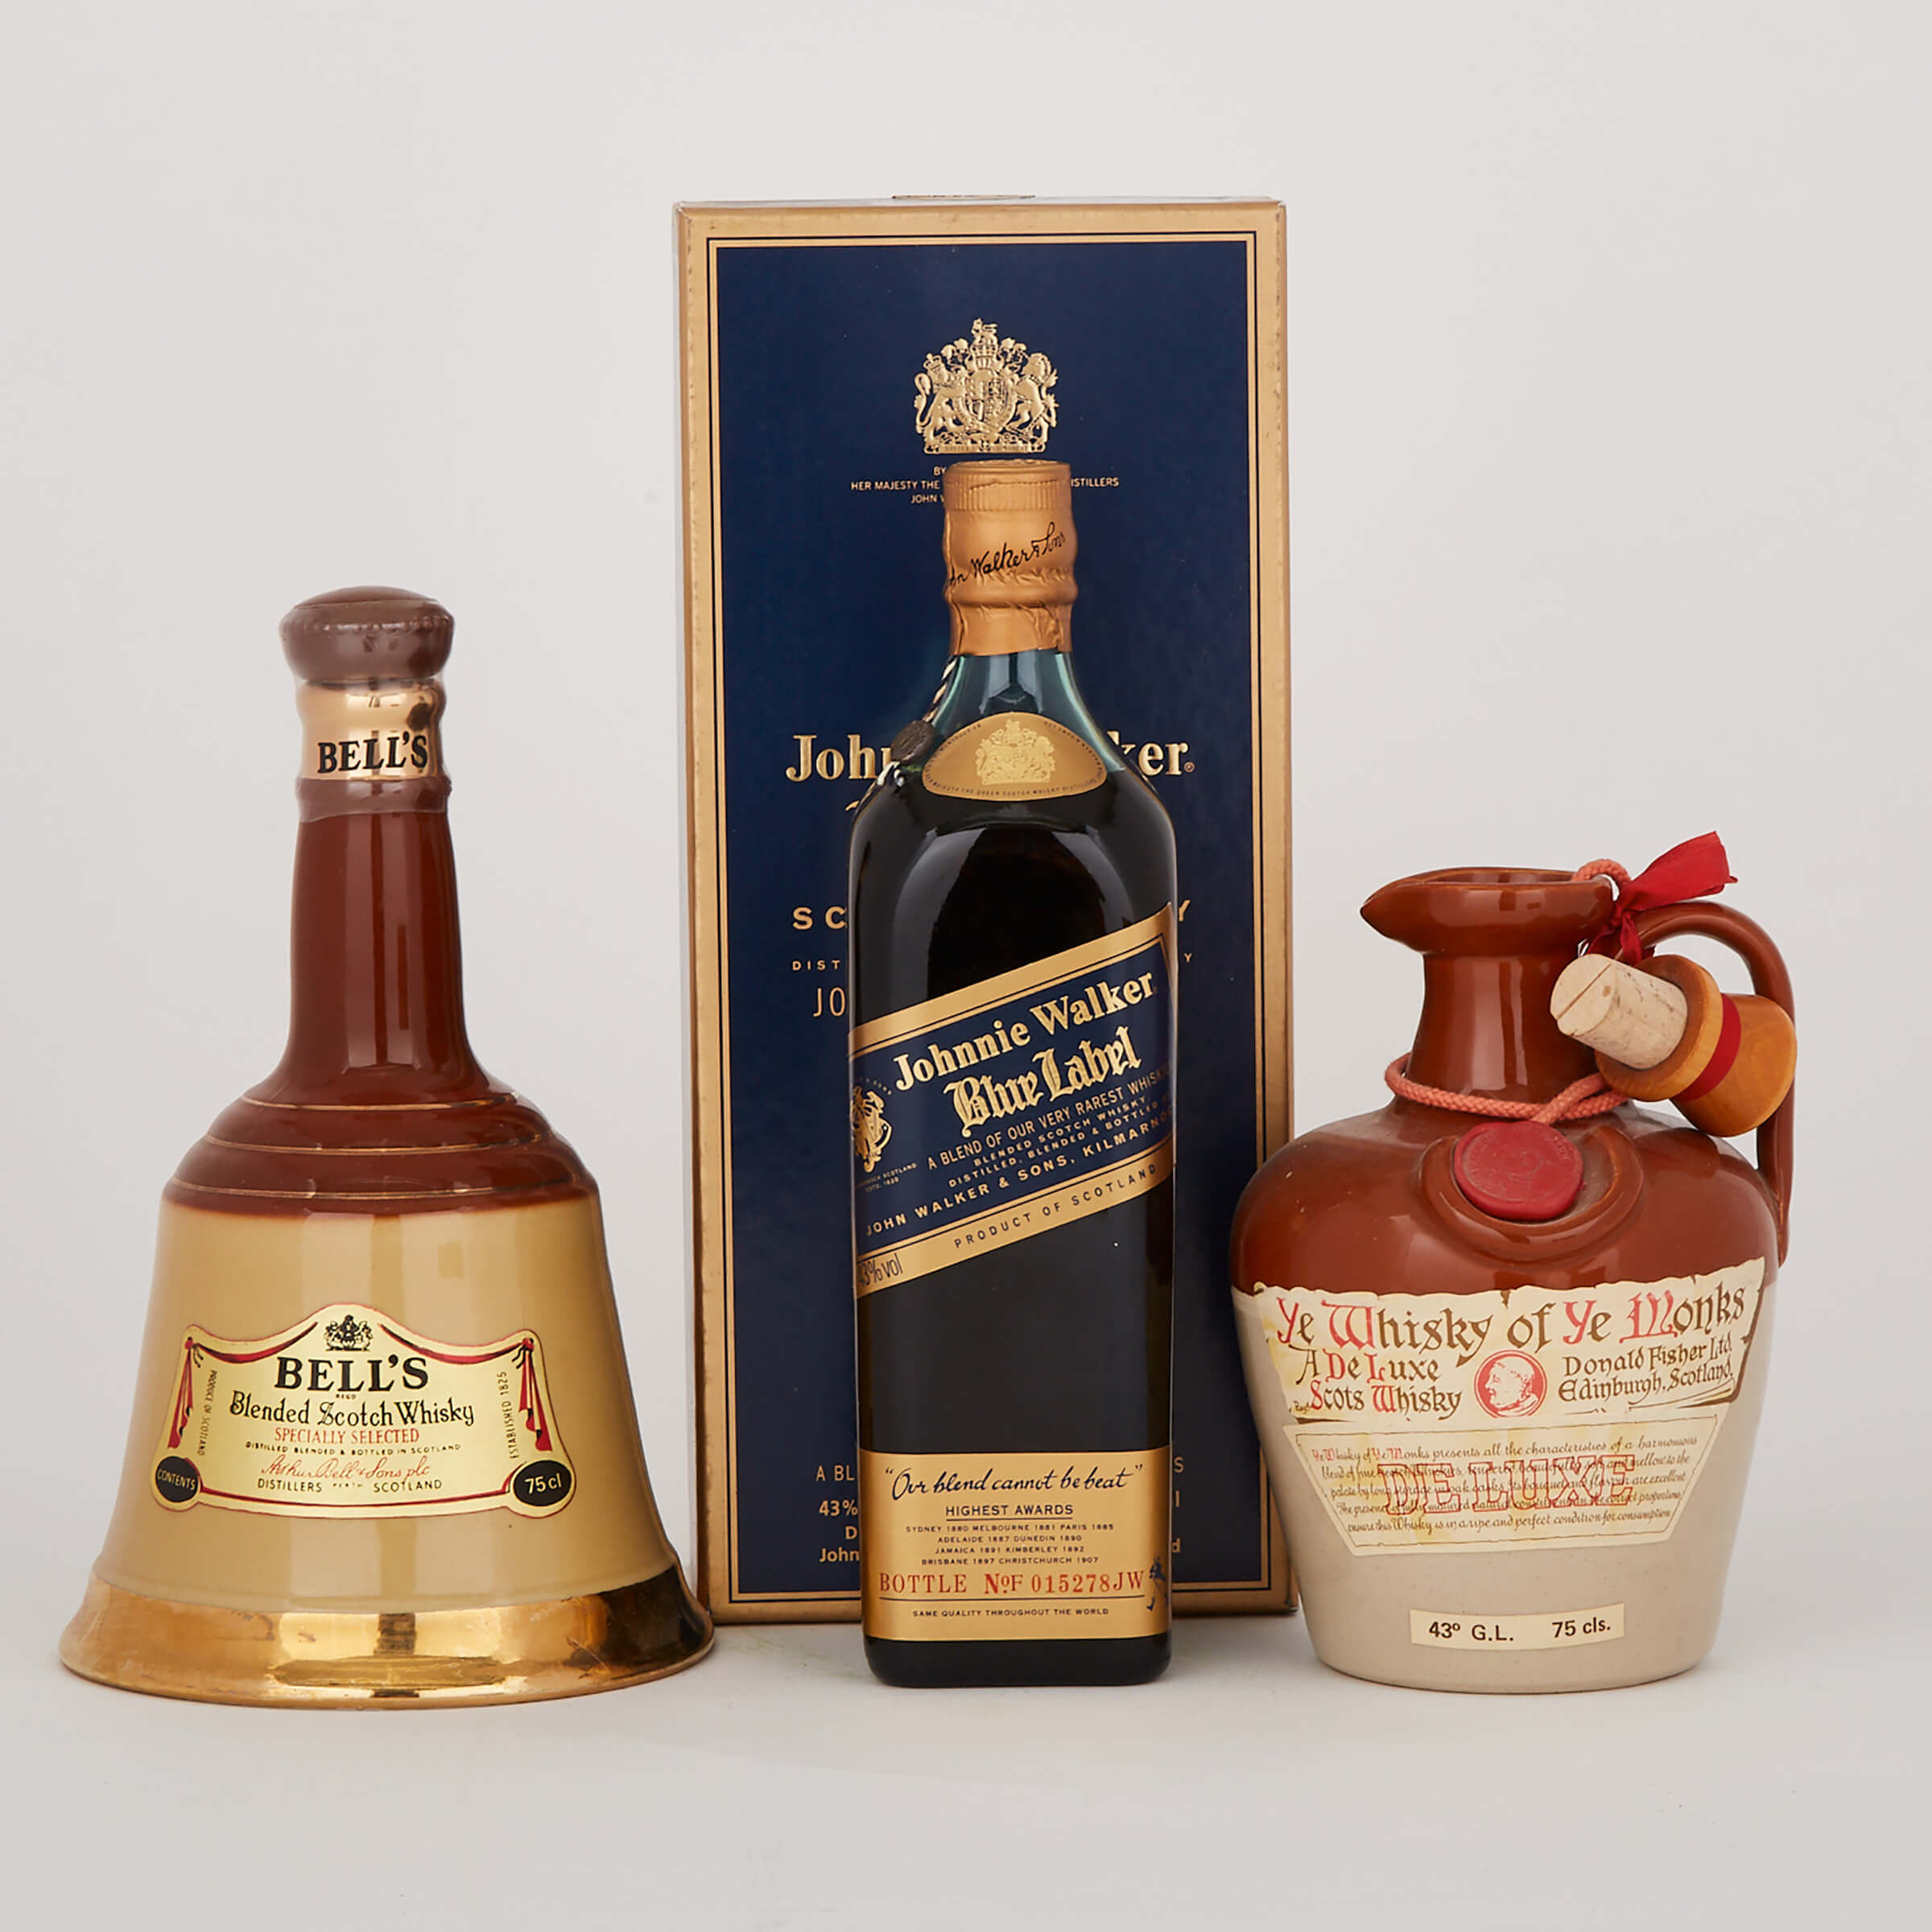 BELL'S BLENDED SCOTCH WHISKY (ONE 500 ML)
JOHNNIE WALKER BLUE LABEL SCOTCH WHISKY (ONE 750 ML)
YE WHISKEY OF YE MONKS 12 YEARS (ONE 75 CL)